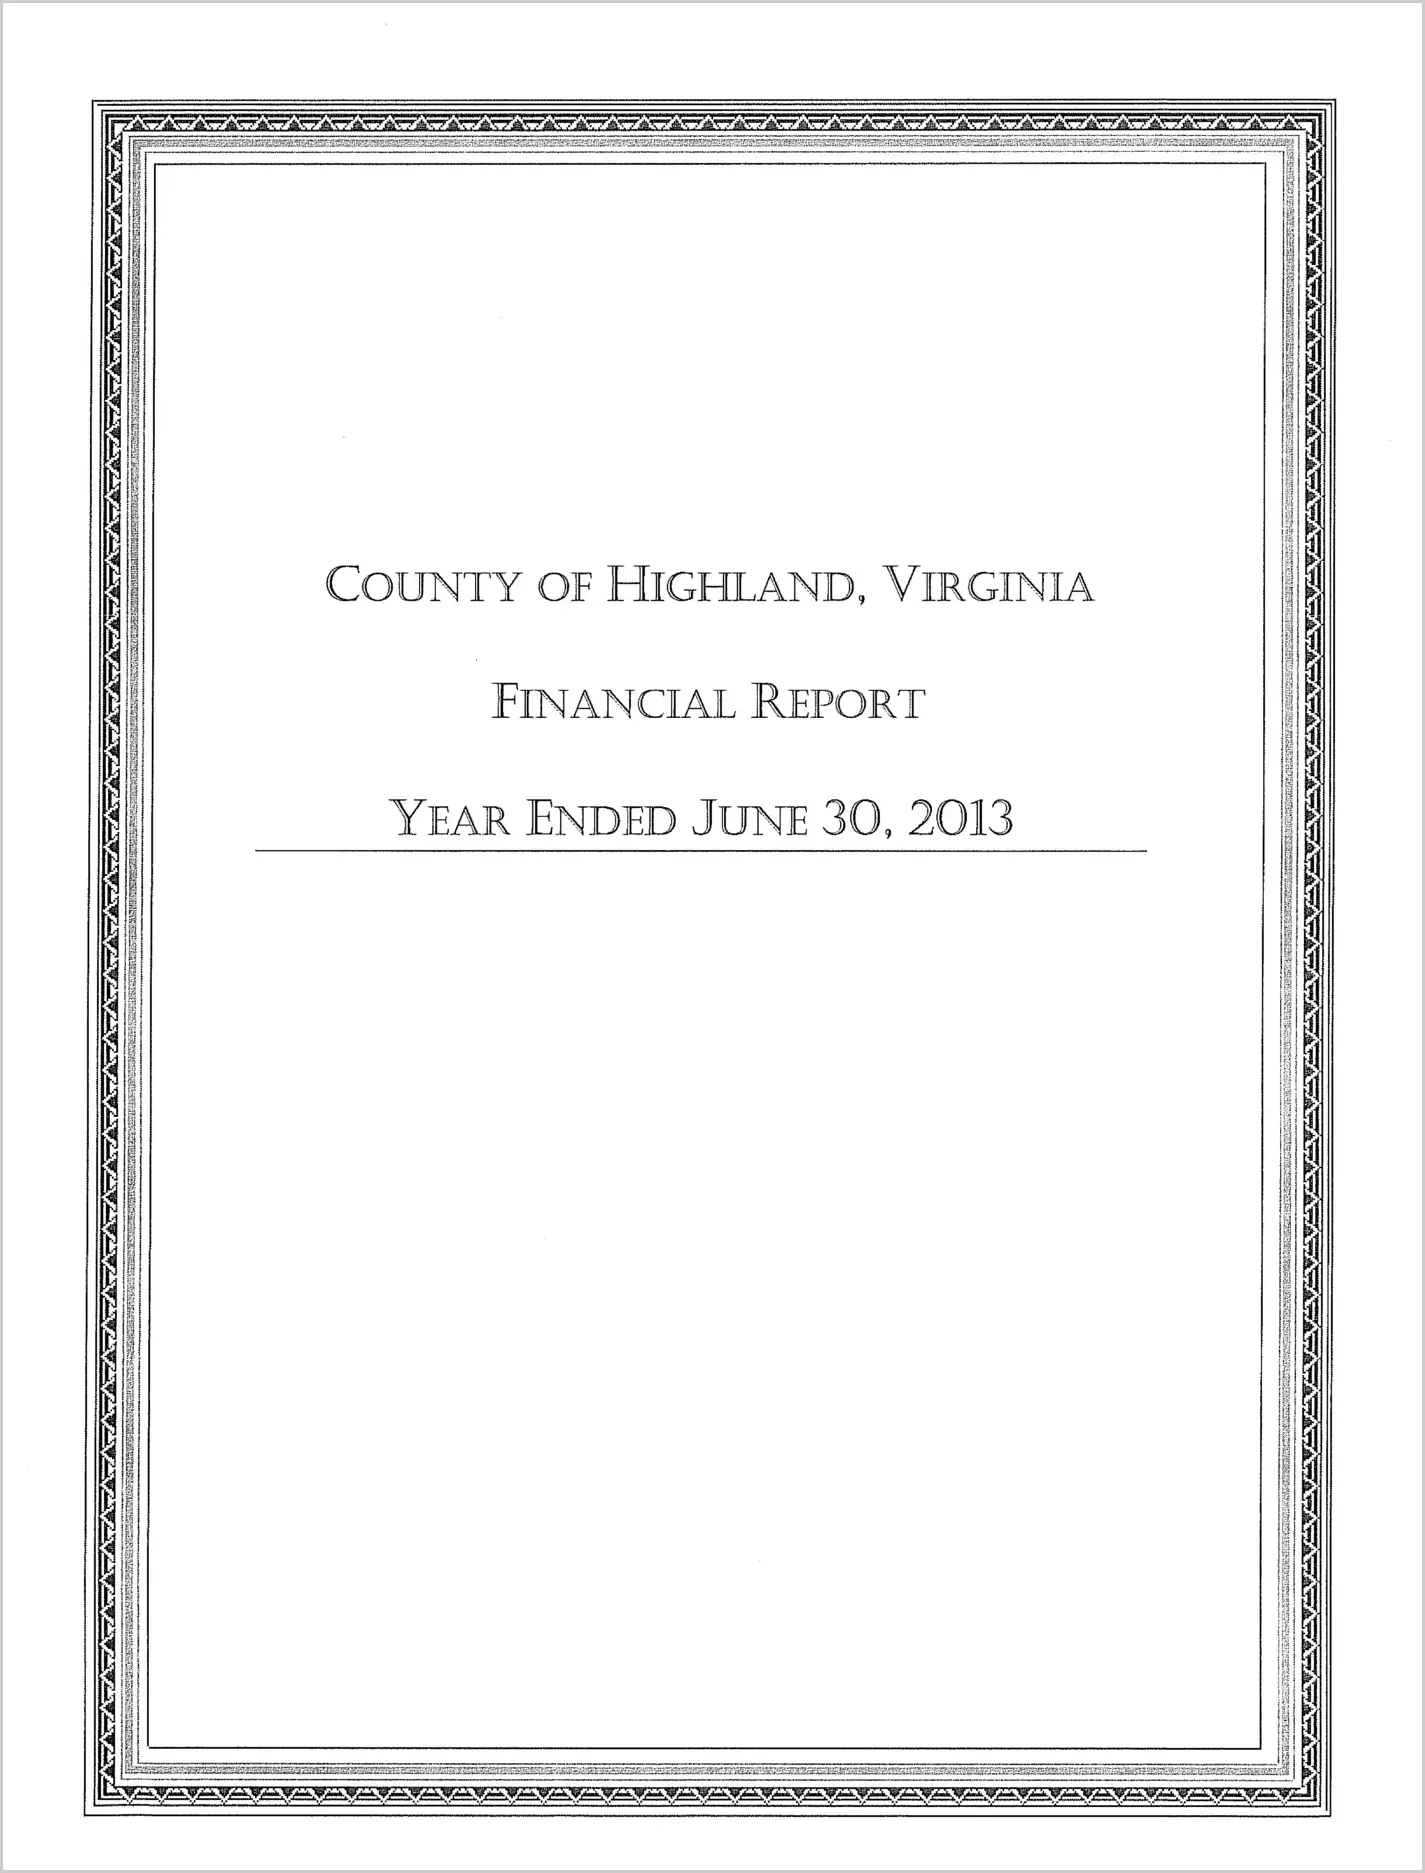 2013 Annual Financial Report for County of Highland